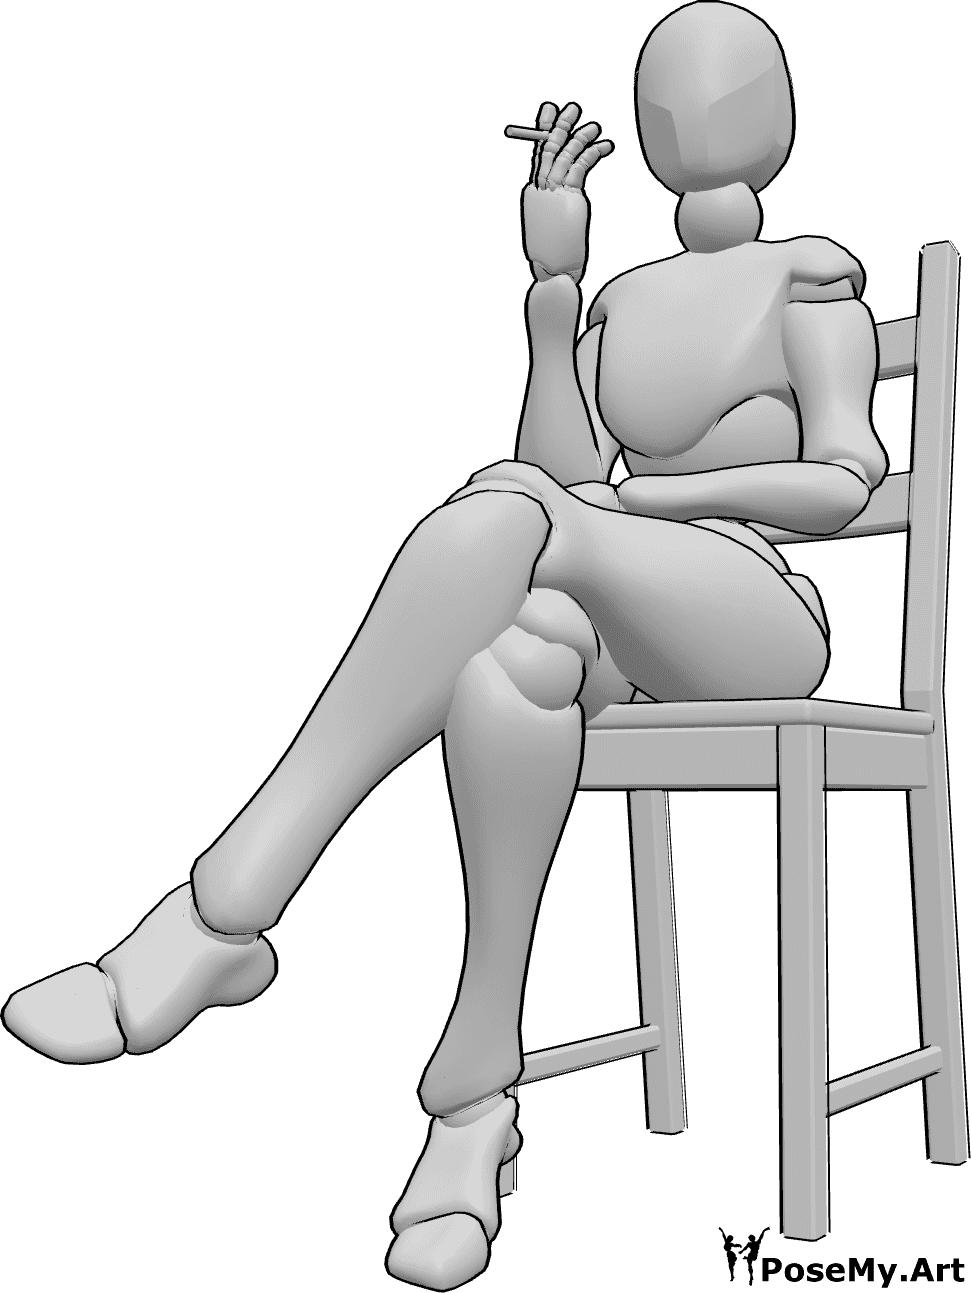 Pose Reference - Female sitting smoking pose - Female is sitting on a chair and smoking cigarette, holding it in her right hand